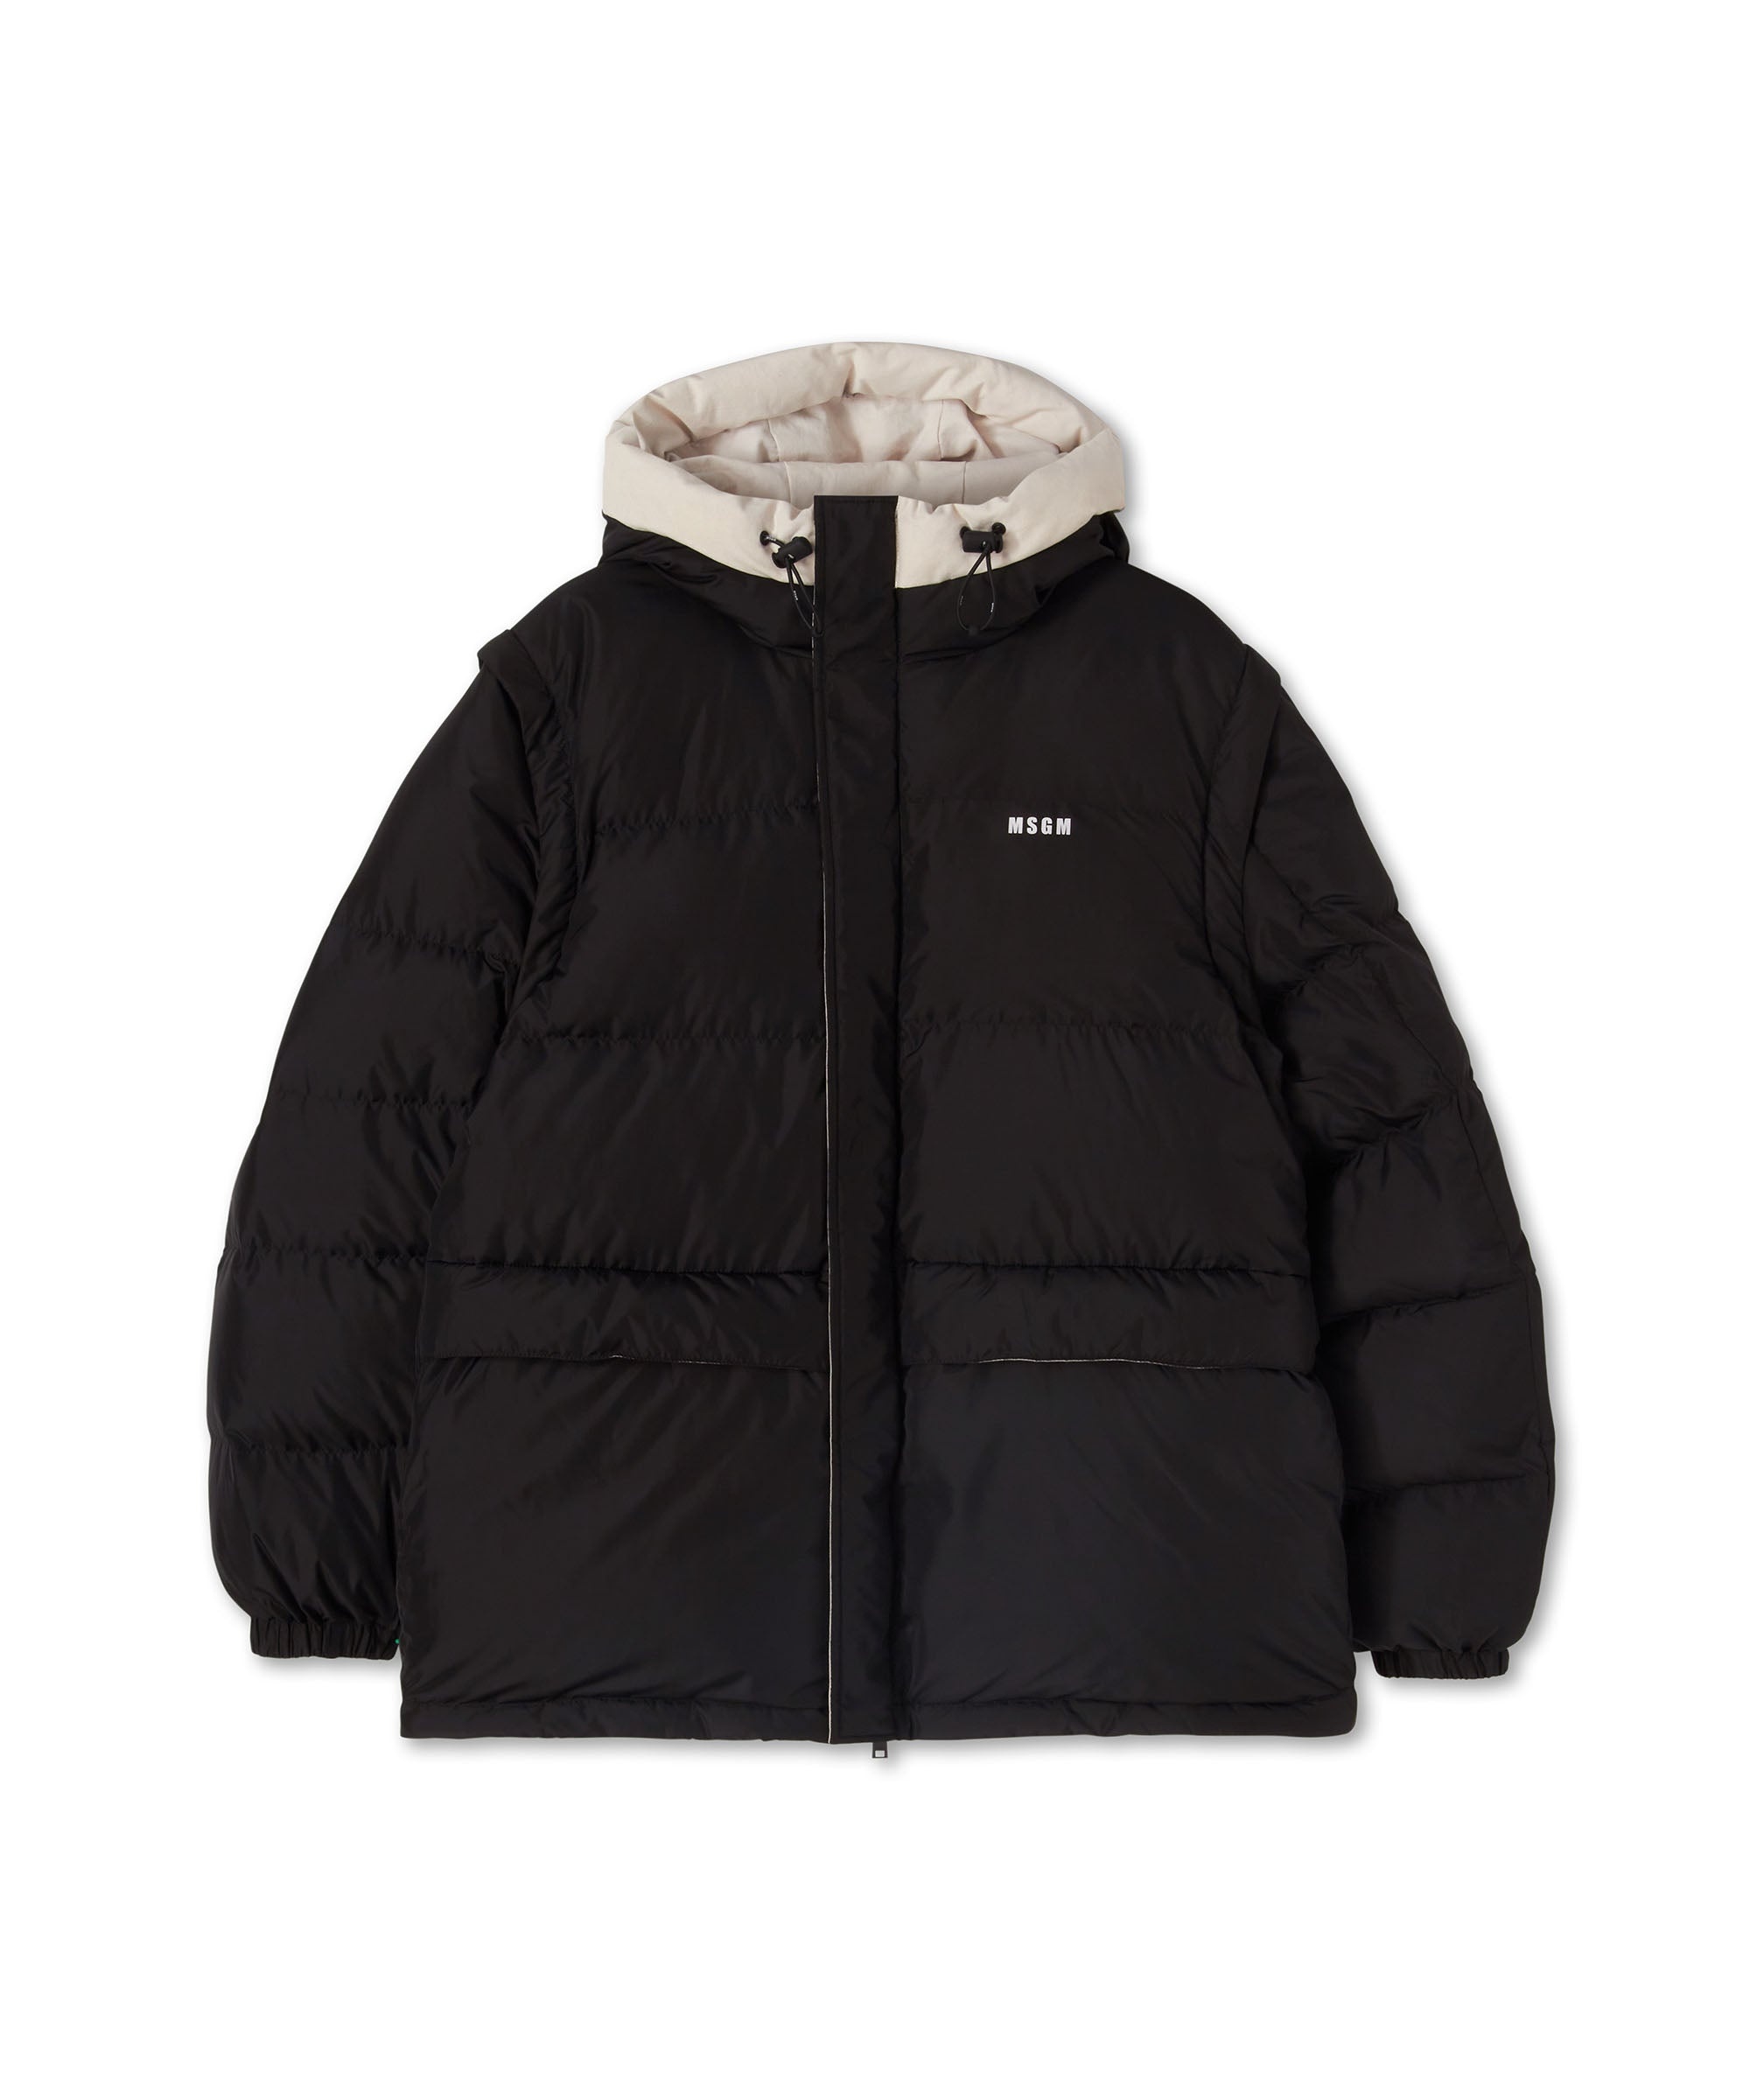 "Micro ripstop" down jacket with micro logo - 1